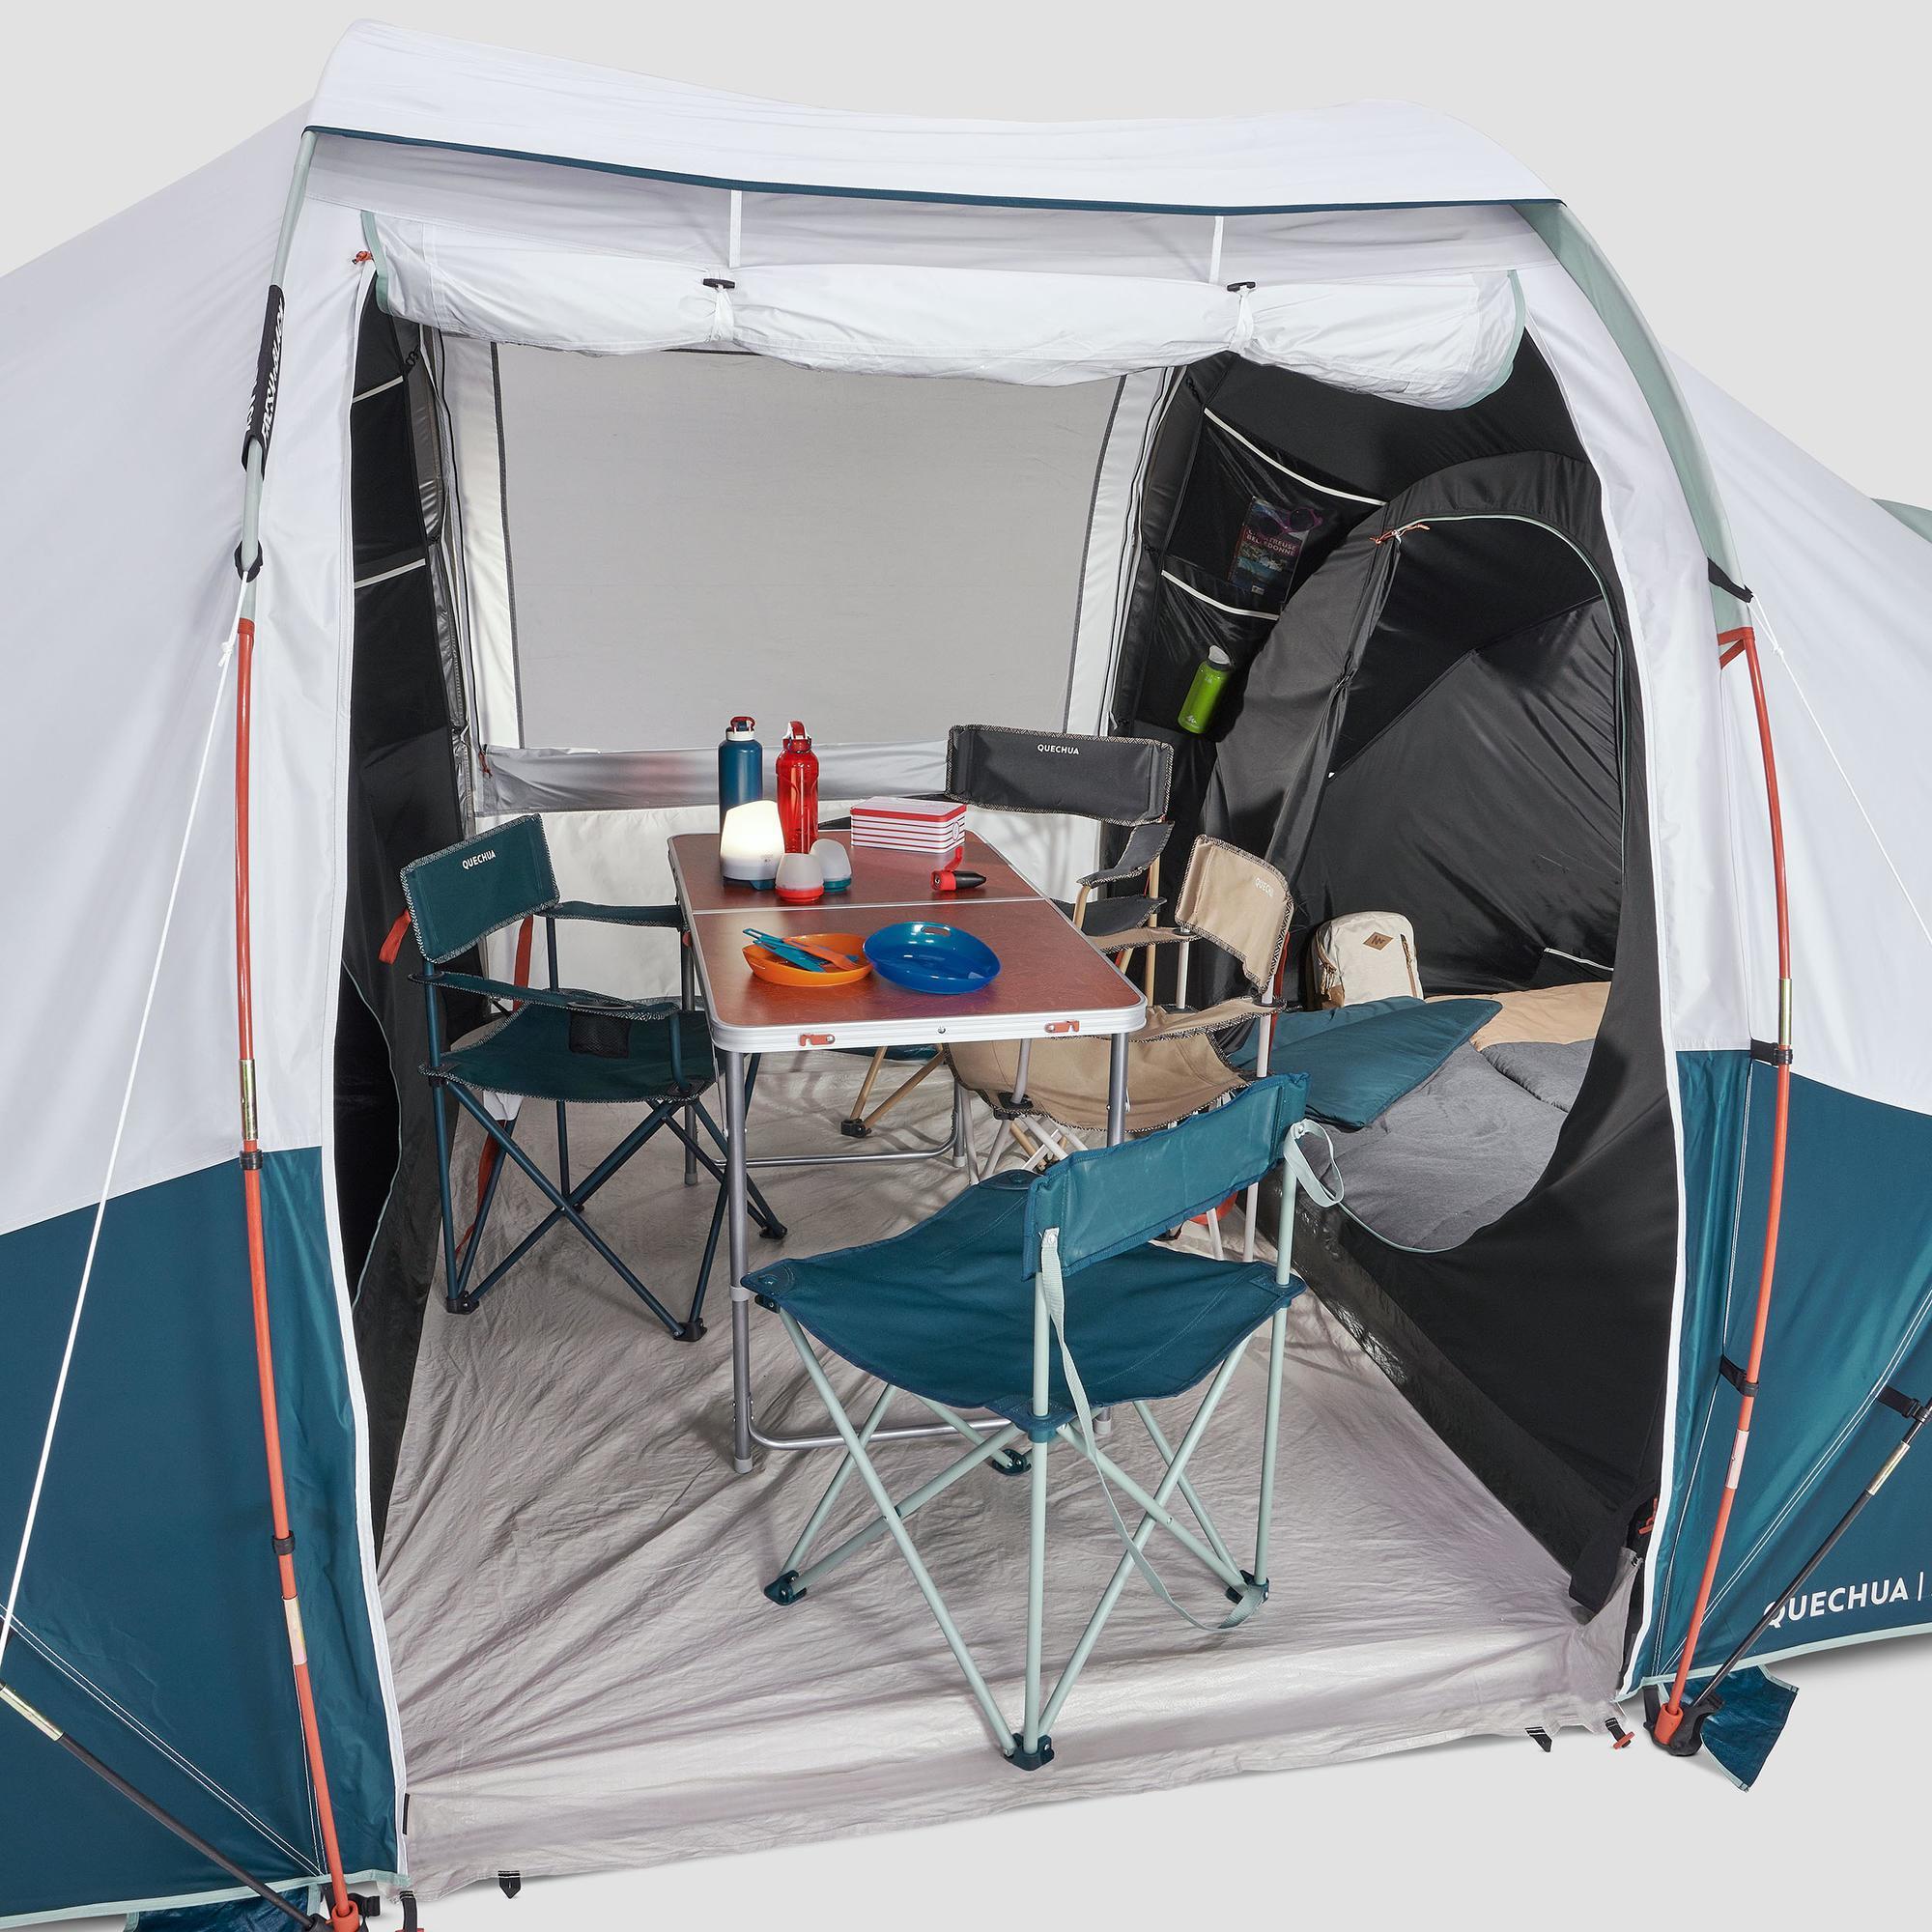 Camping tent with poles - Arpenaz 4.2 F 